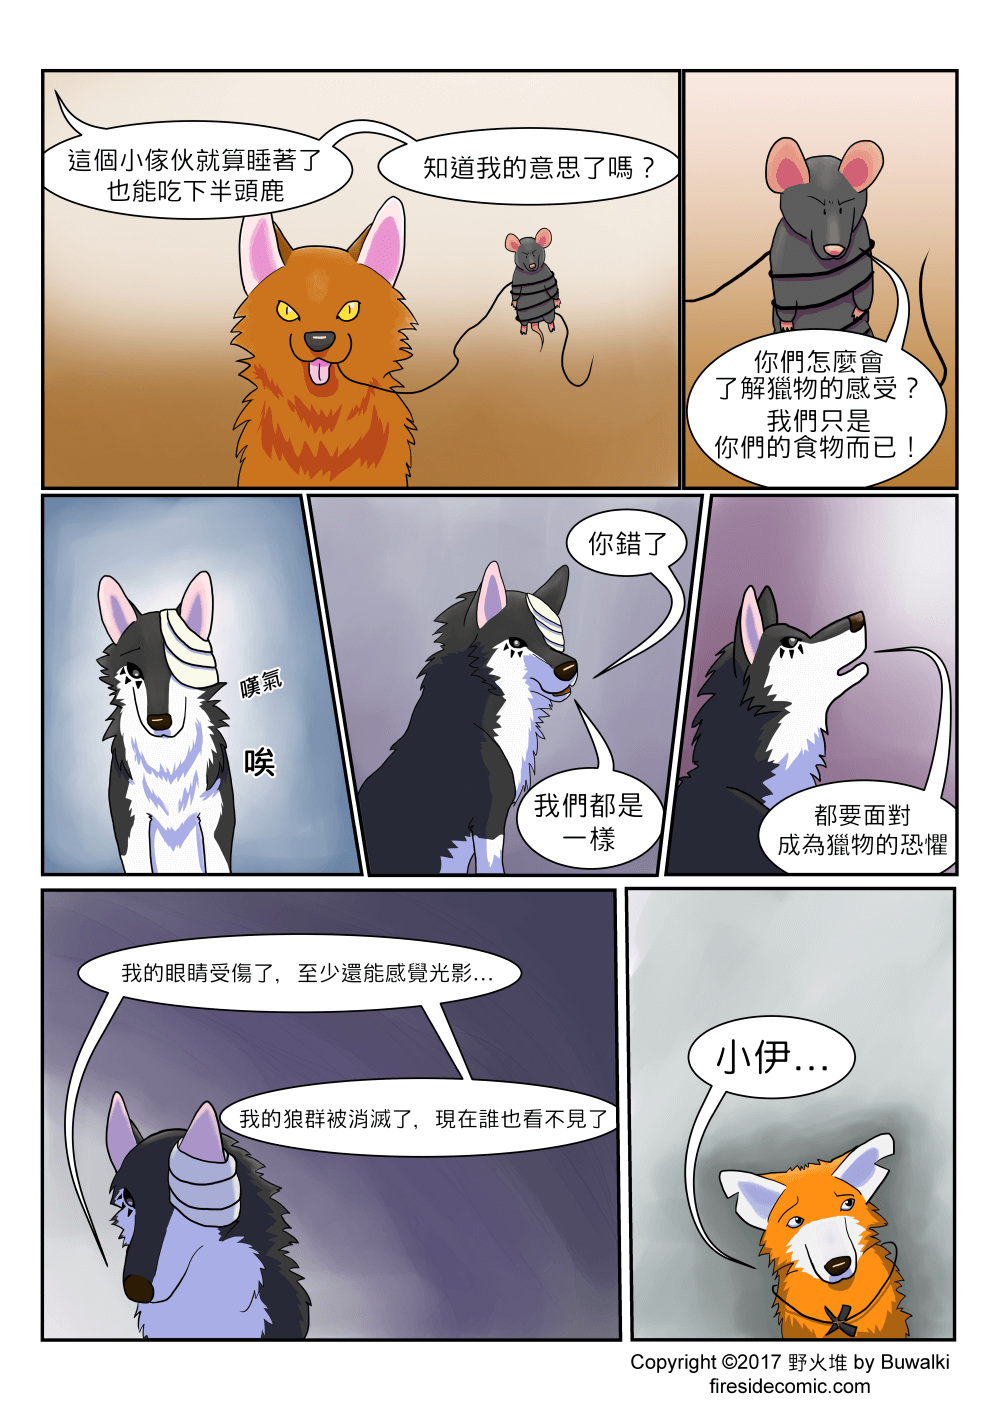 RatTrouble06